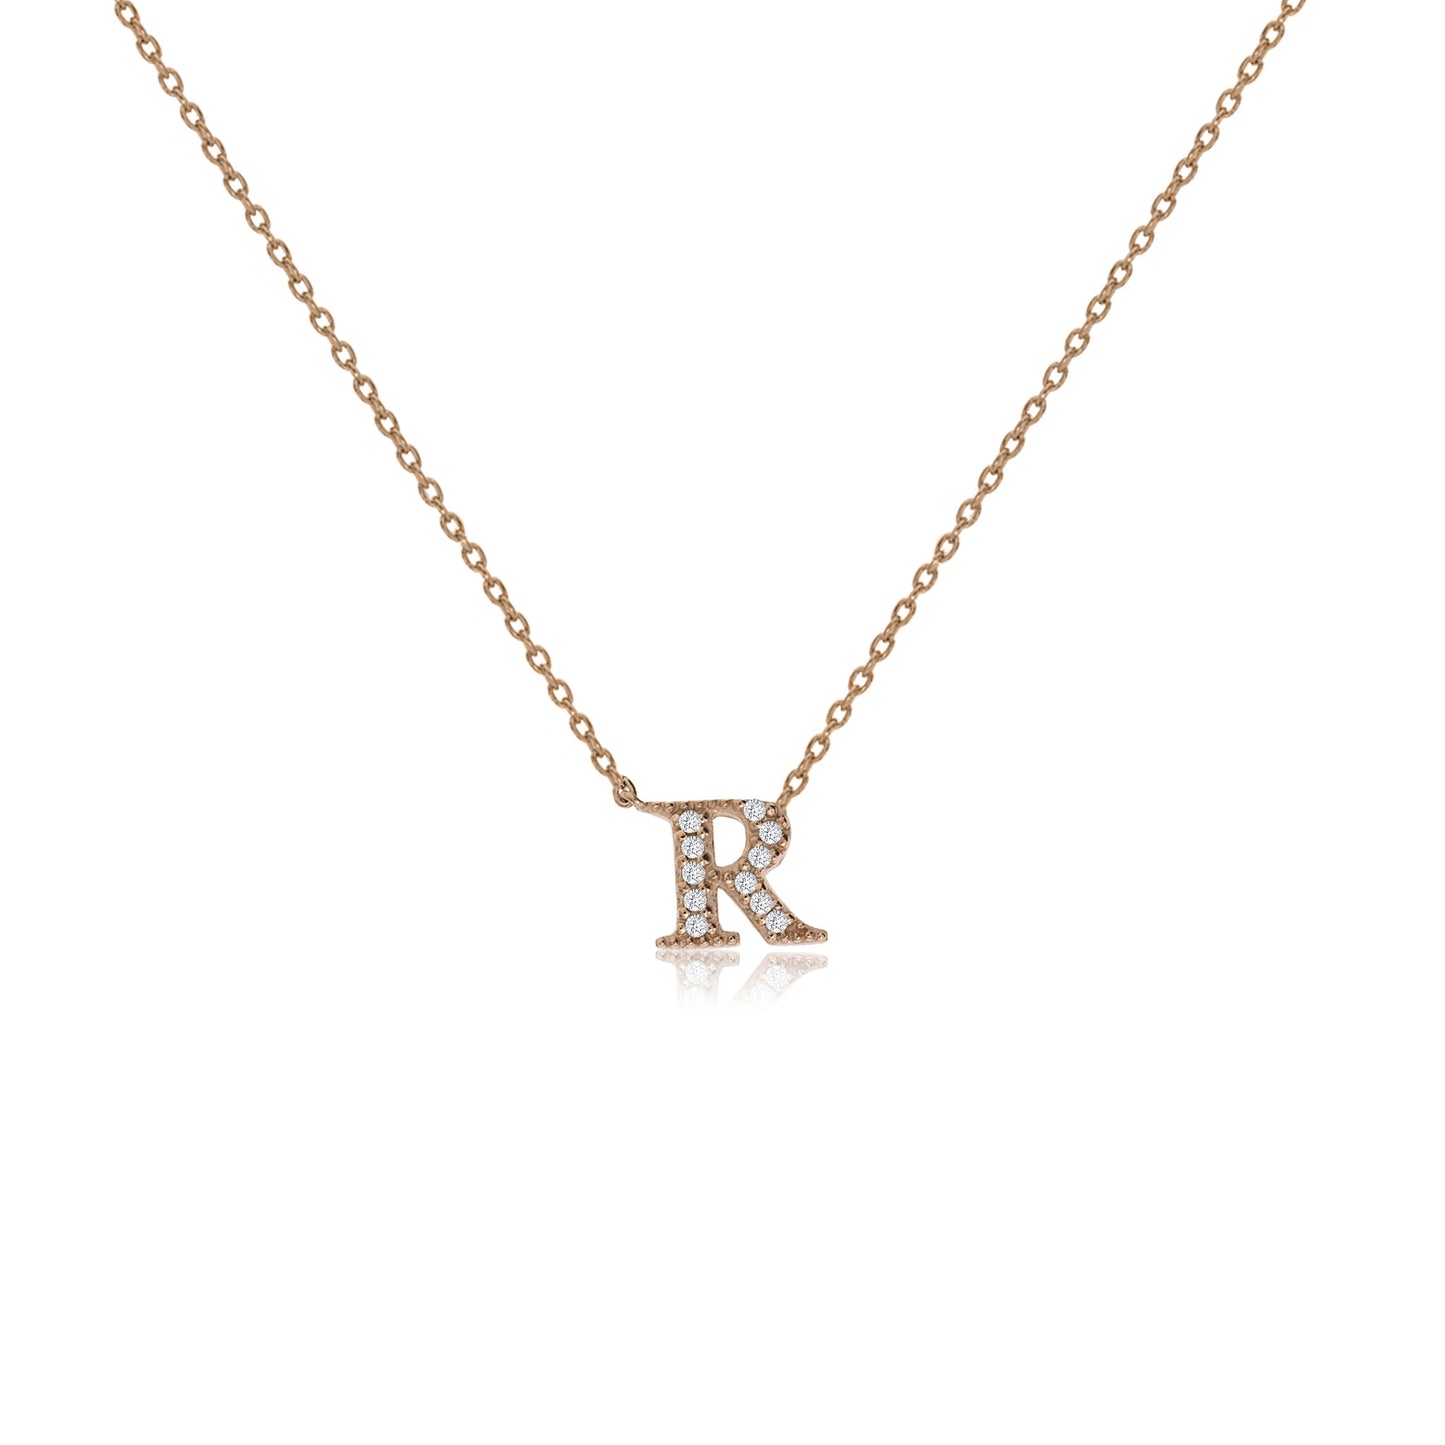 
Rose gold on silver initial necklace with CZ decoration and sliding length adjuster, initial 'R'.

